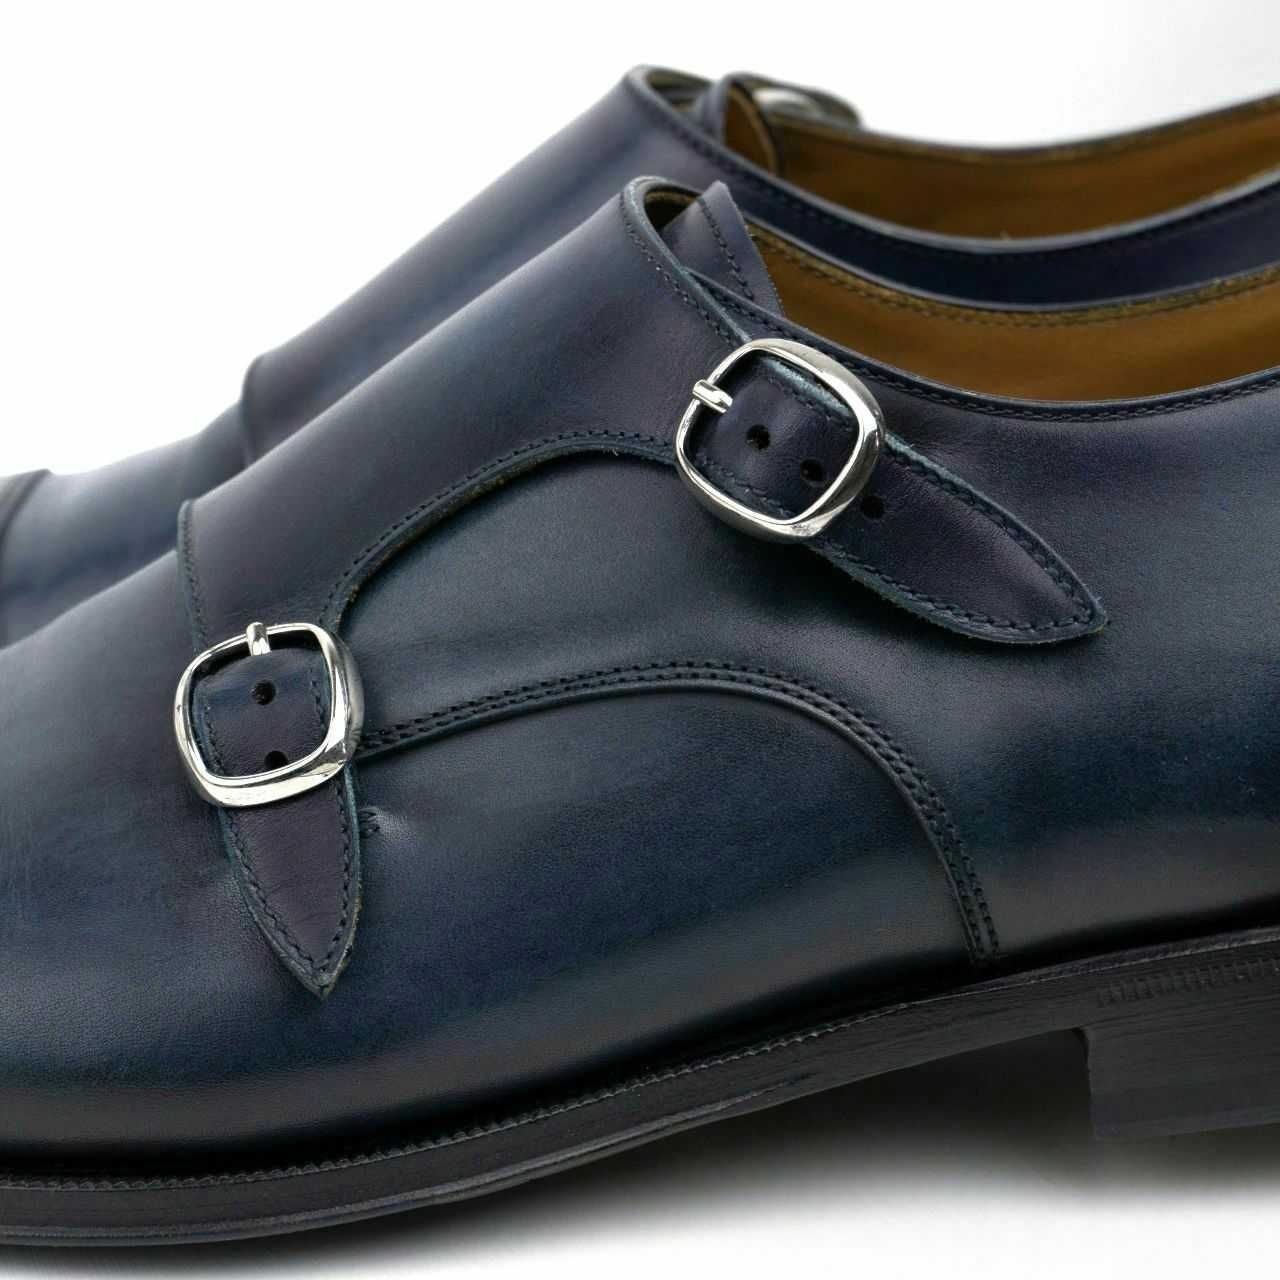 Leather shoes - monks FRANCESCHETTI (45) Italy